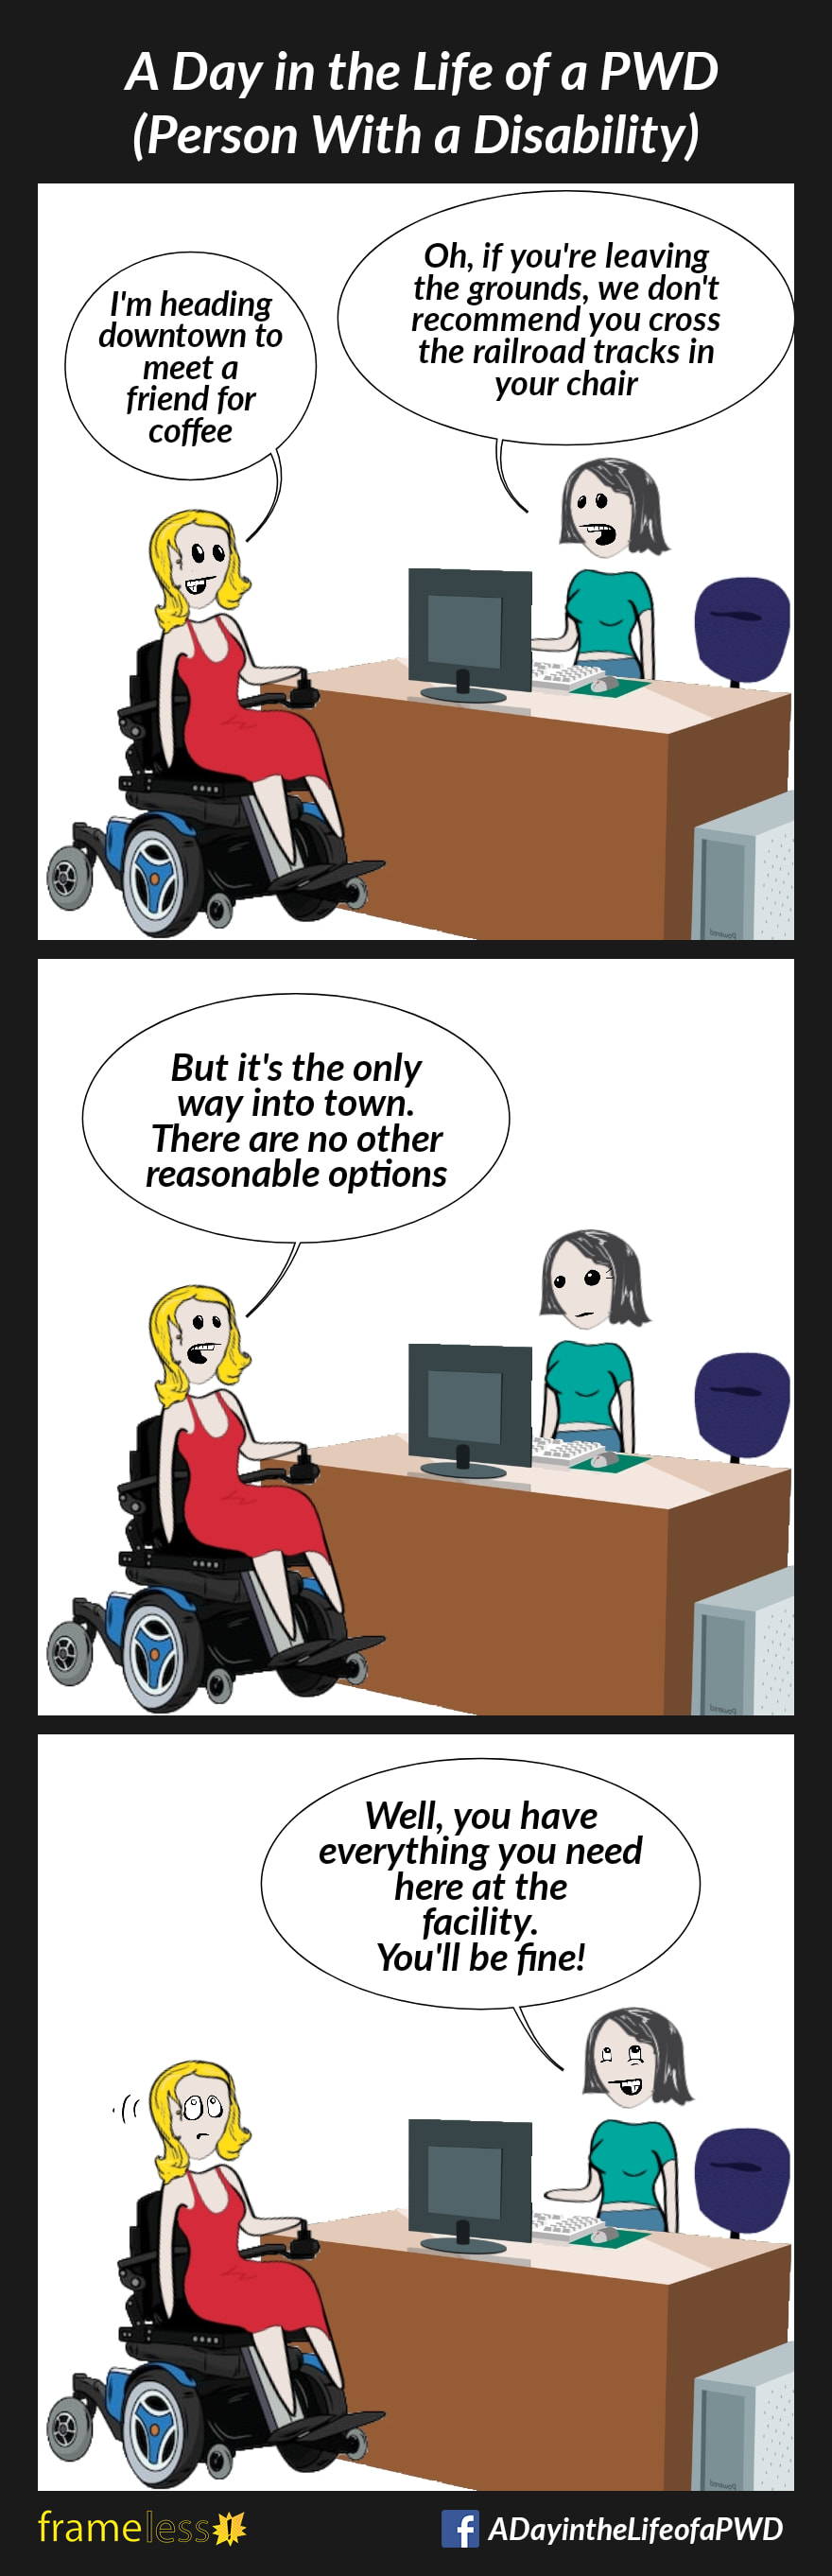 COMIC STRIP
A Day in the Life of a PWD
Frame 1:
A woman in a power wheelchair is passing by the front desk of her care facility.
WOMAN: I'm heading downtown to meet a friend for coffee.
CLERK: Oh, if you're leaving the grounds, we don't recommend you cross the railroad tracks in your wheelchair.

FRAME 2:
WOMAN: But it's the only way into tow. There are no other reasonable options.

FRAME 3:
CLERK:
Well, you have everything you need here at the facility. You'll be fine!